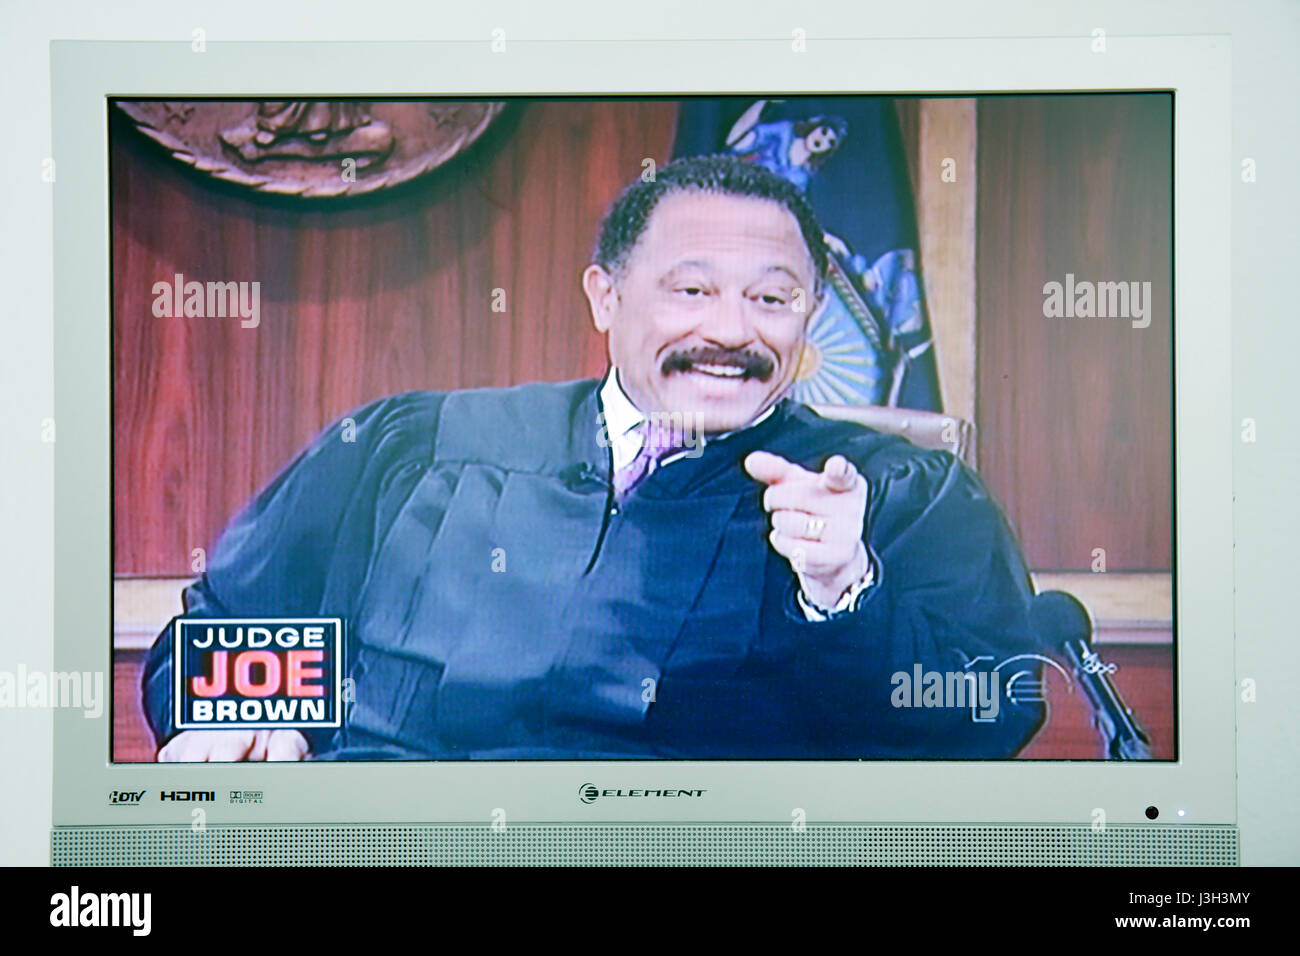 Florida,television,set,TV,wide screen,flat panel,screen,cable,channel,HDTV,digital,monitor,screen,daytime programming,reality show,Judge Joe Brown,cou Stock Photo